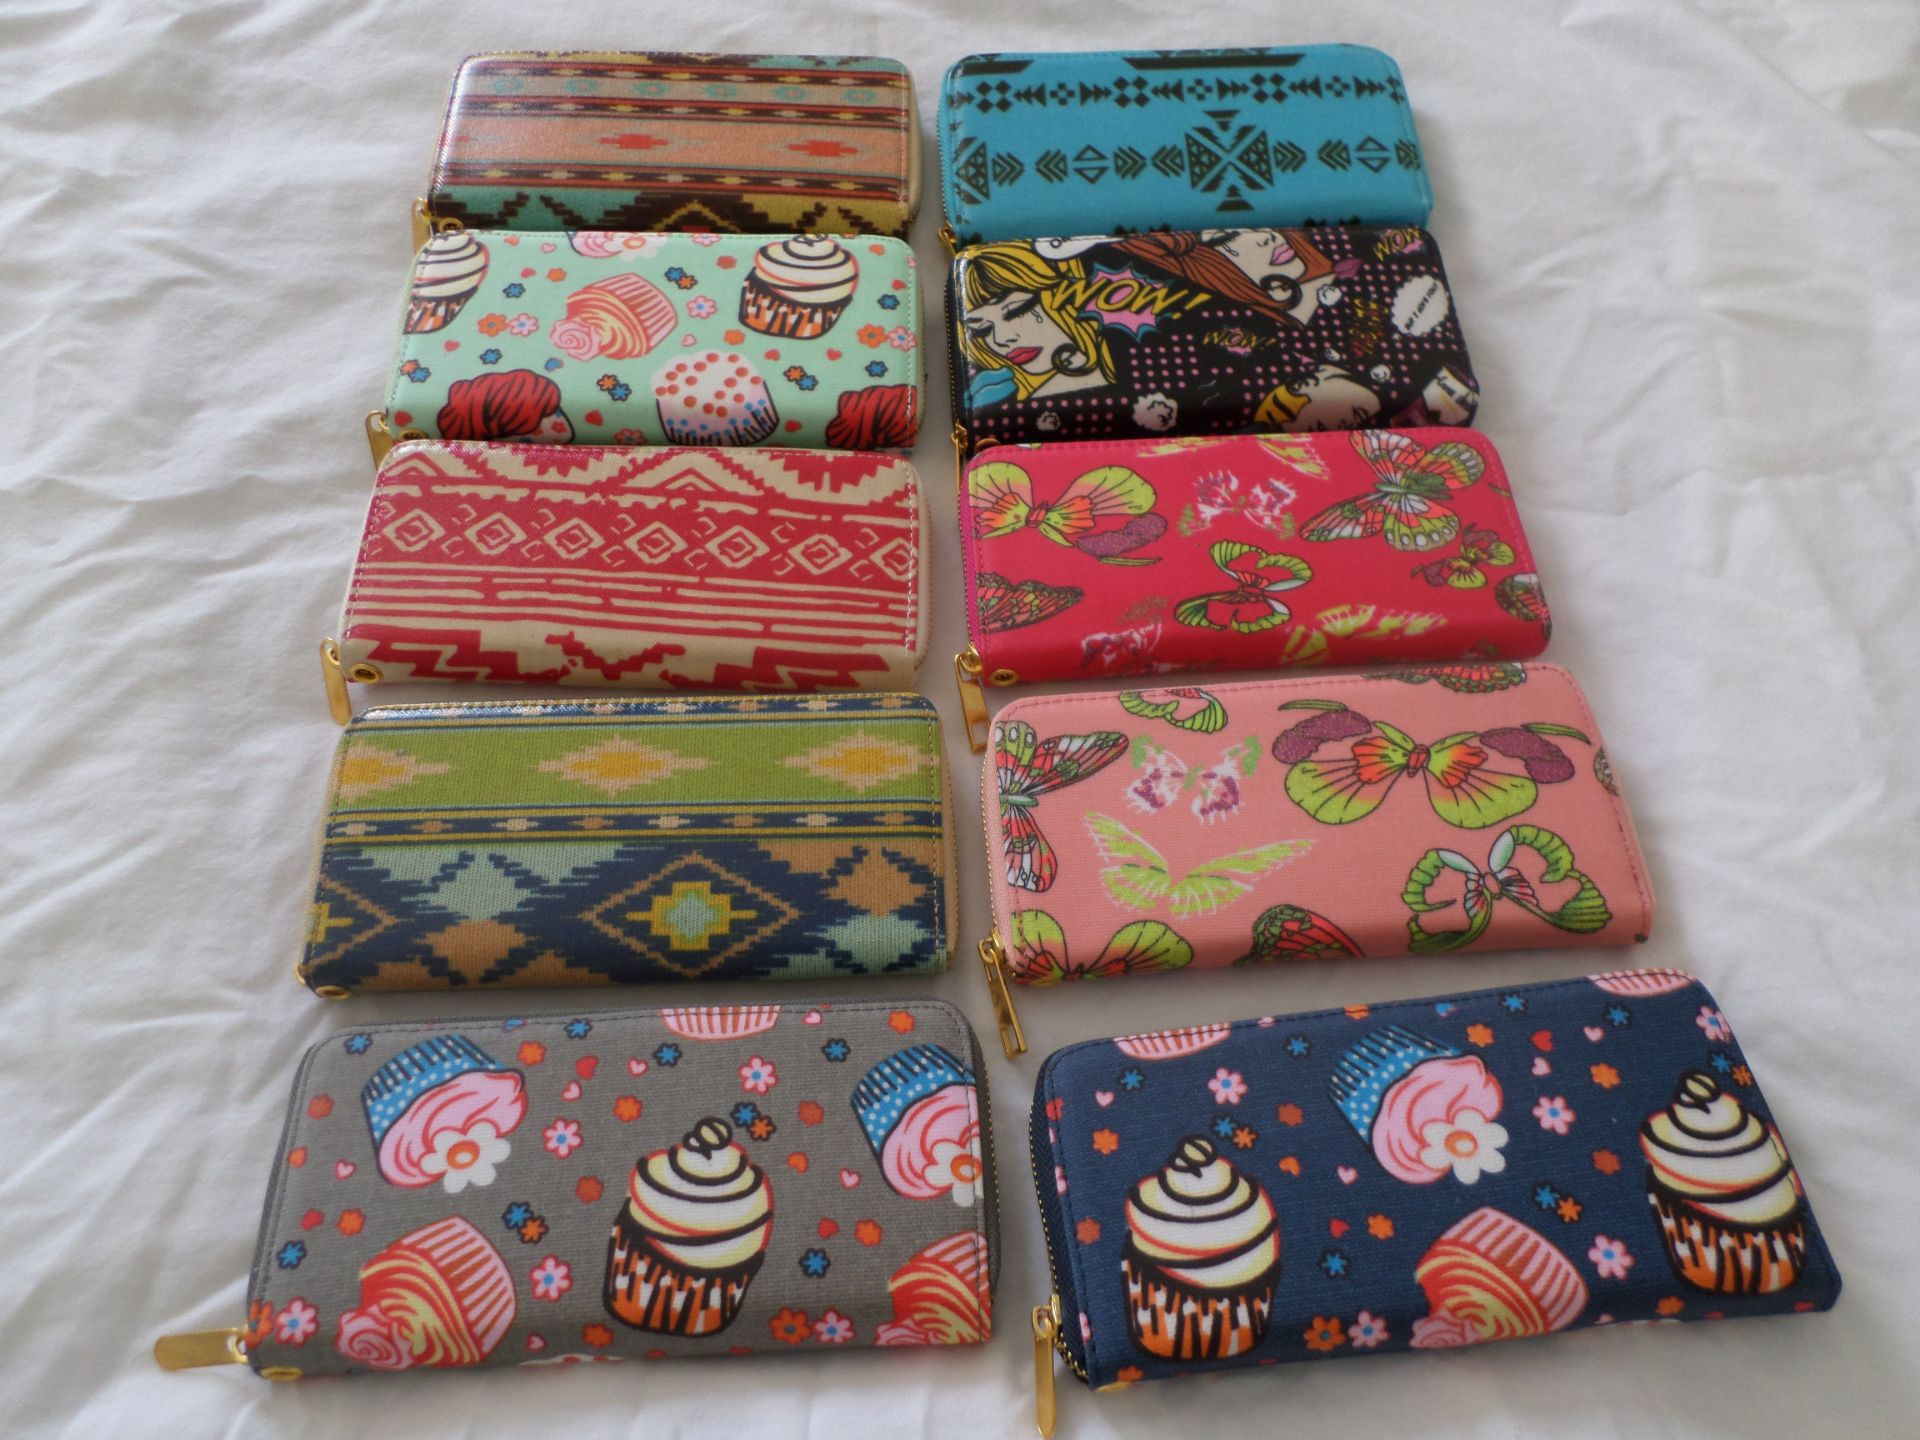 30 x Ladies Clutch/Purses RRP £14 Each. Brand New - Image 4 of 4